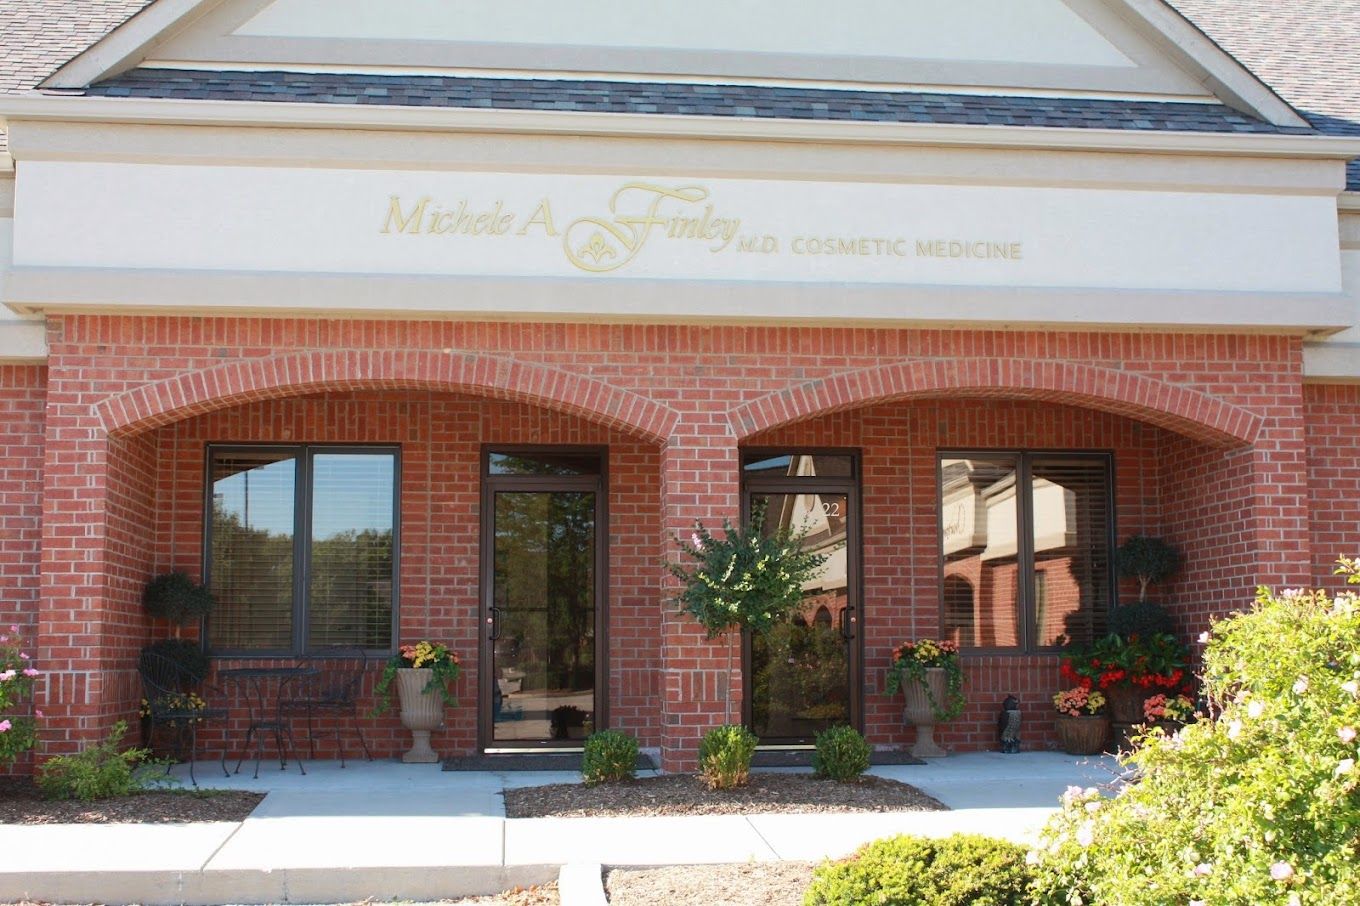 Michele Finley MD- Cosmetic Medicine  office exterior in Carmel IN